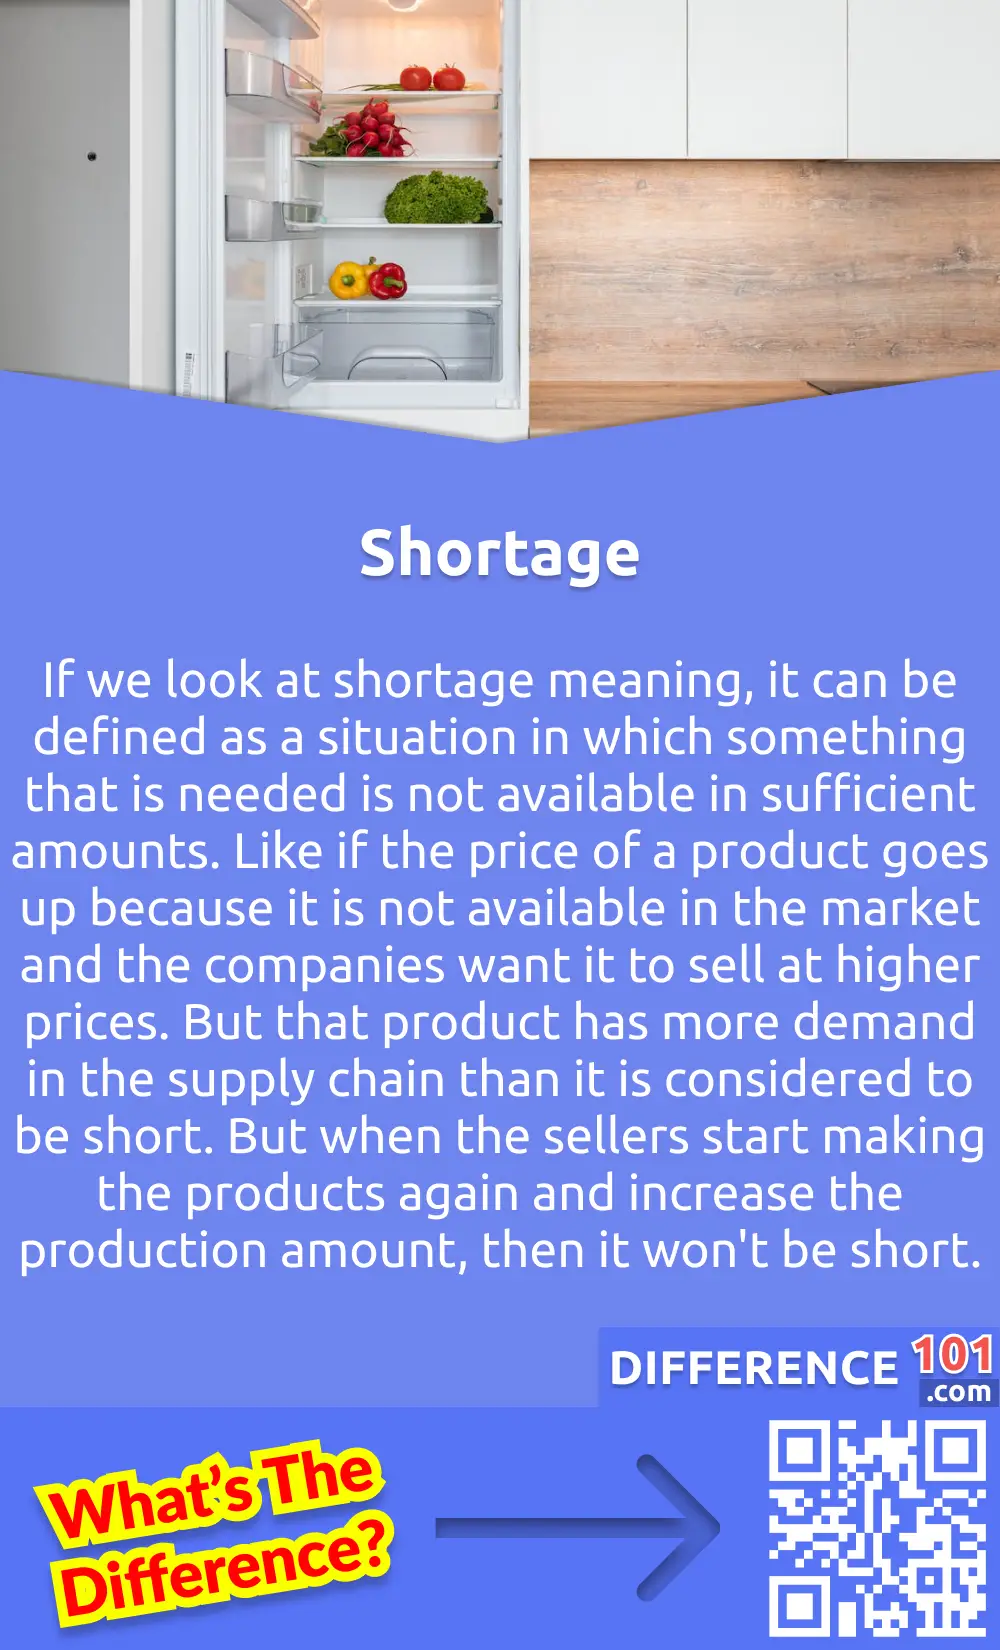 What is Shortage? If we look at shortage meaning, it can be defined as a situation in which something that is needed is not available in sufficient amounts. This can be because of many different reasons. For example, if a farmer goes on strike, then the stuff related to the farm, like milk, will be short for that period. And it will stay short until the strike is over. And once it is over, the same thing can be obtained again. There are many different examples which can explain the shortage. Like if the price of a product goes up because it is not available in the market and the companies want it to sell at higher prices. But that product has more demand in the supply chain than it is considered to be short. But when the sellers start making the products again and increase the production amount, then it won't be short. Shortages are mostly created by the sellers so that the prices can go higher.
